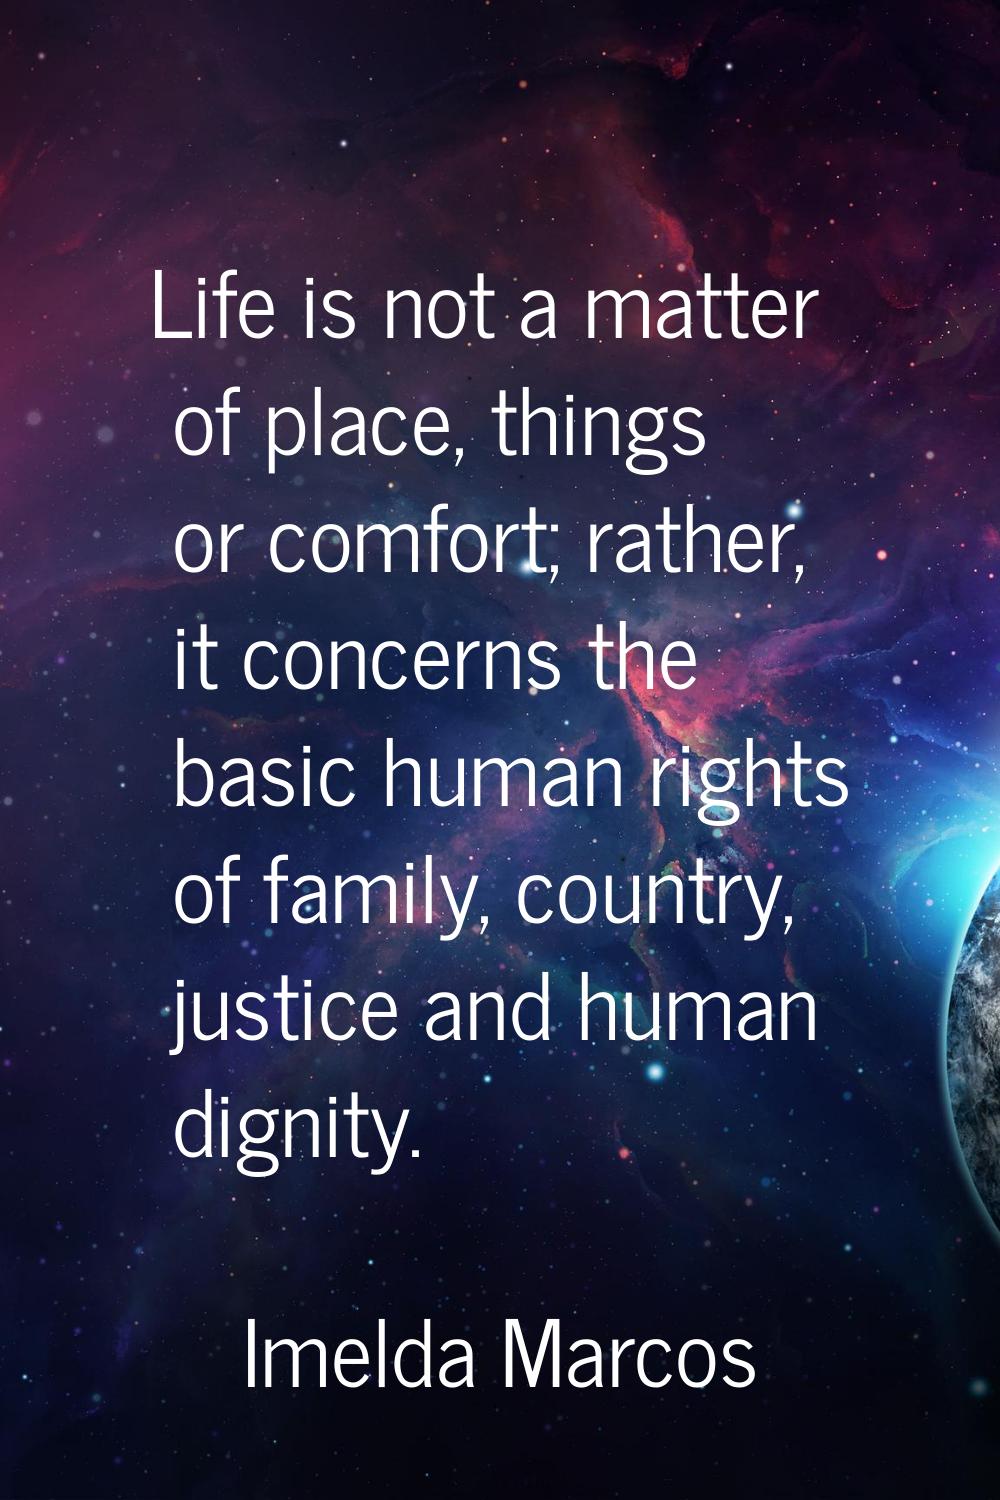 Life is not a matter of place, things or comfort; rather, it concerns the basic human rights of fam